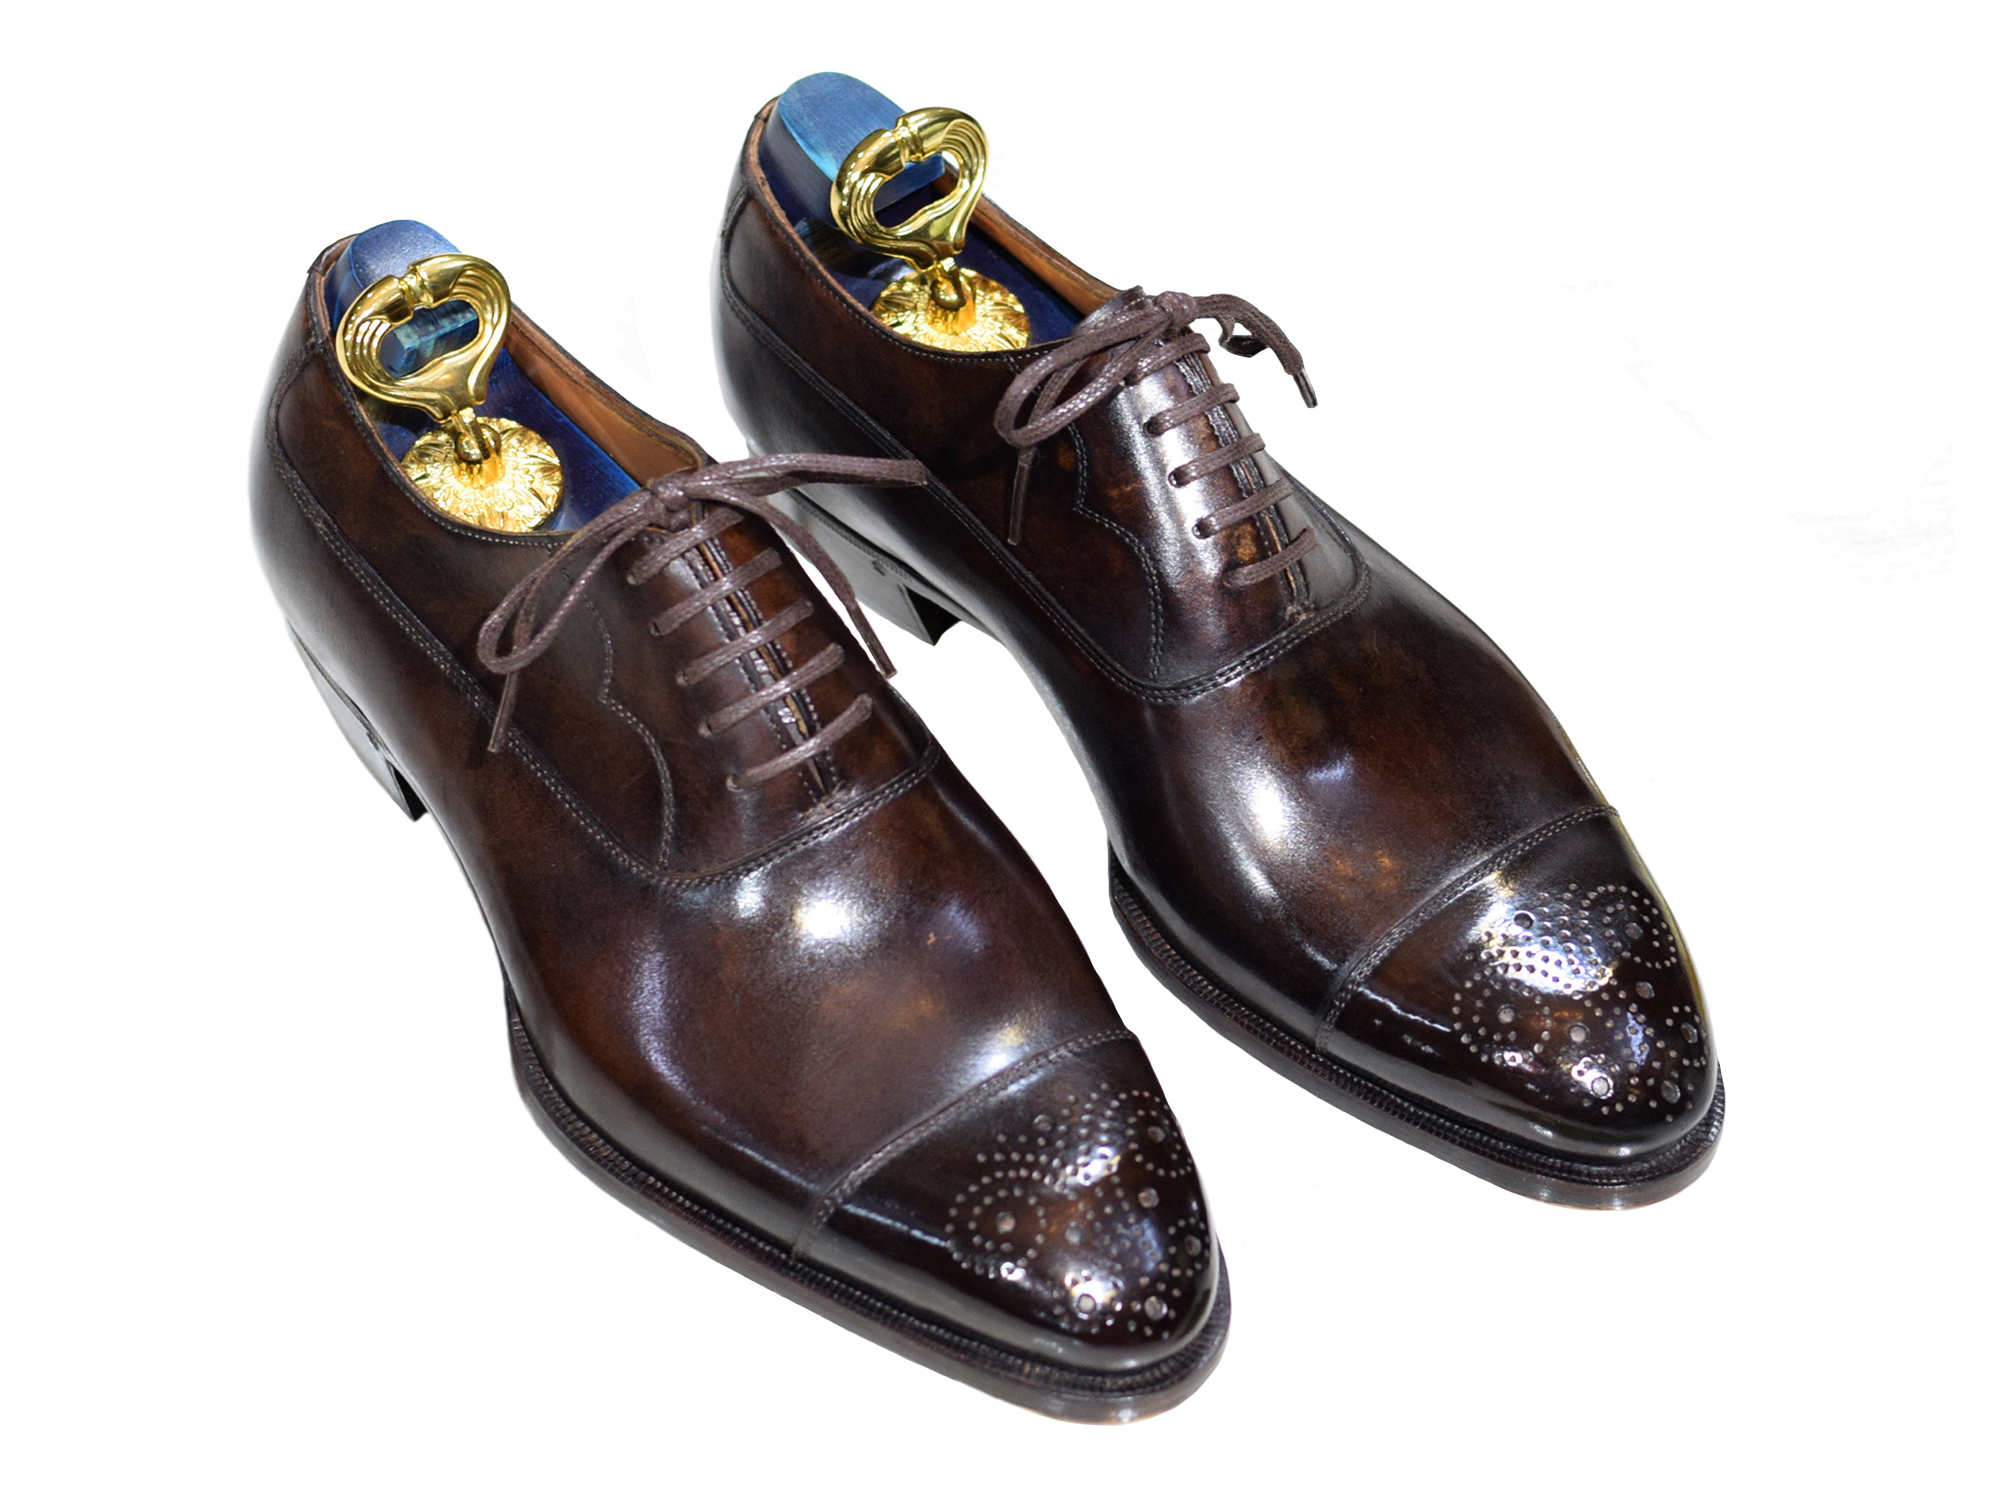 MTO Butterfly Balmoral Captoe Shoes